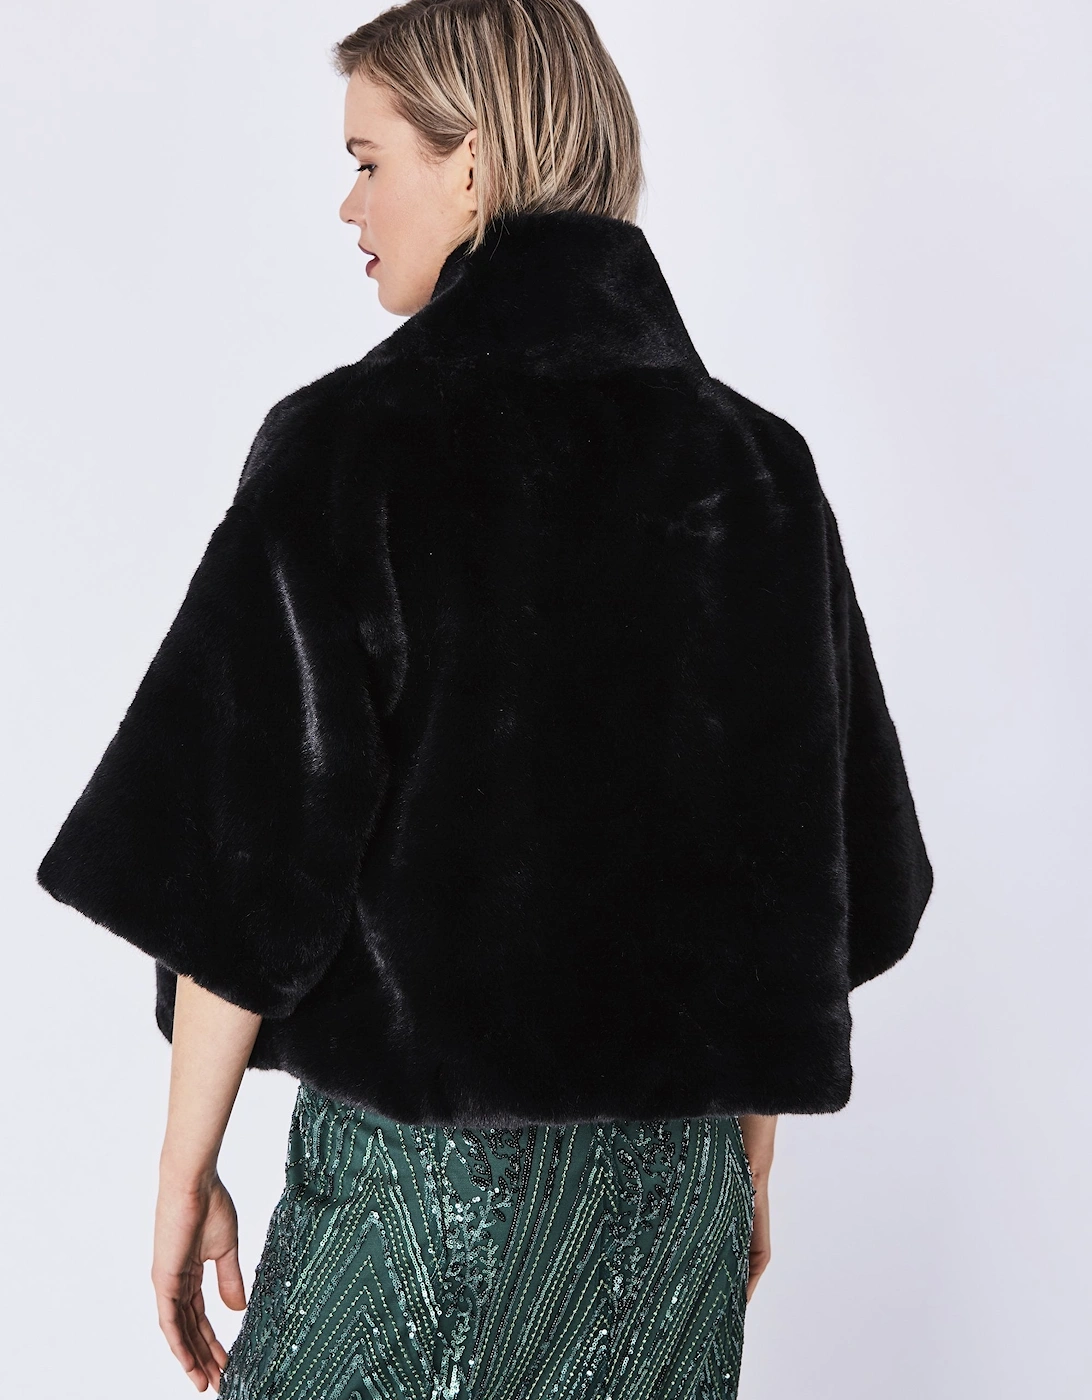 Black Faux Fur Jacket With Pearls